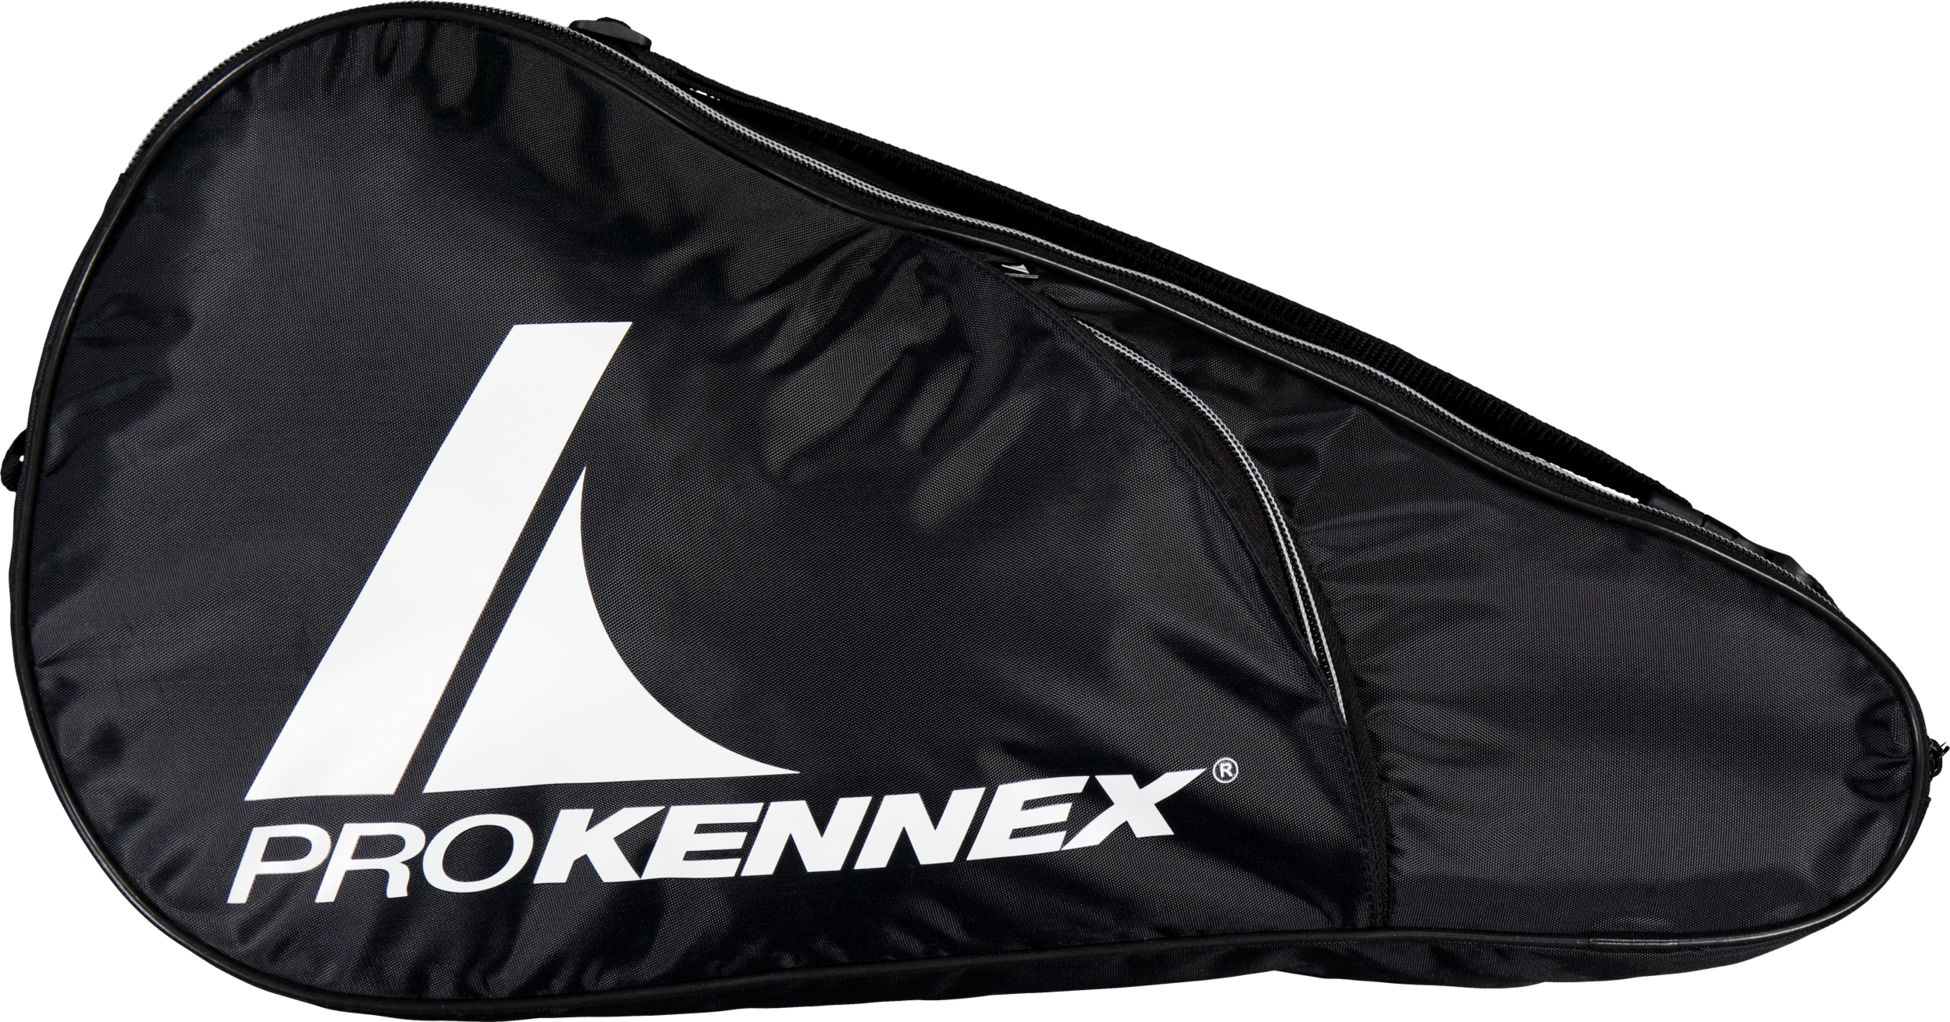 PRO KENNEX, PADEL COVER